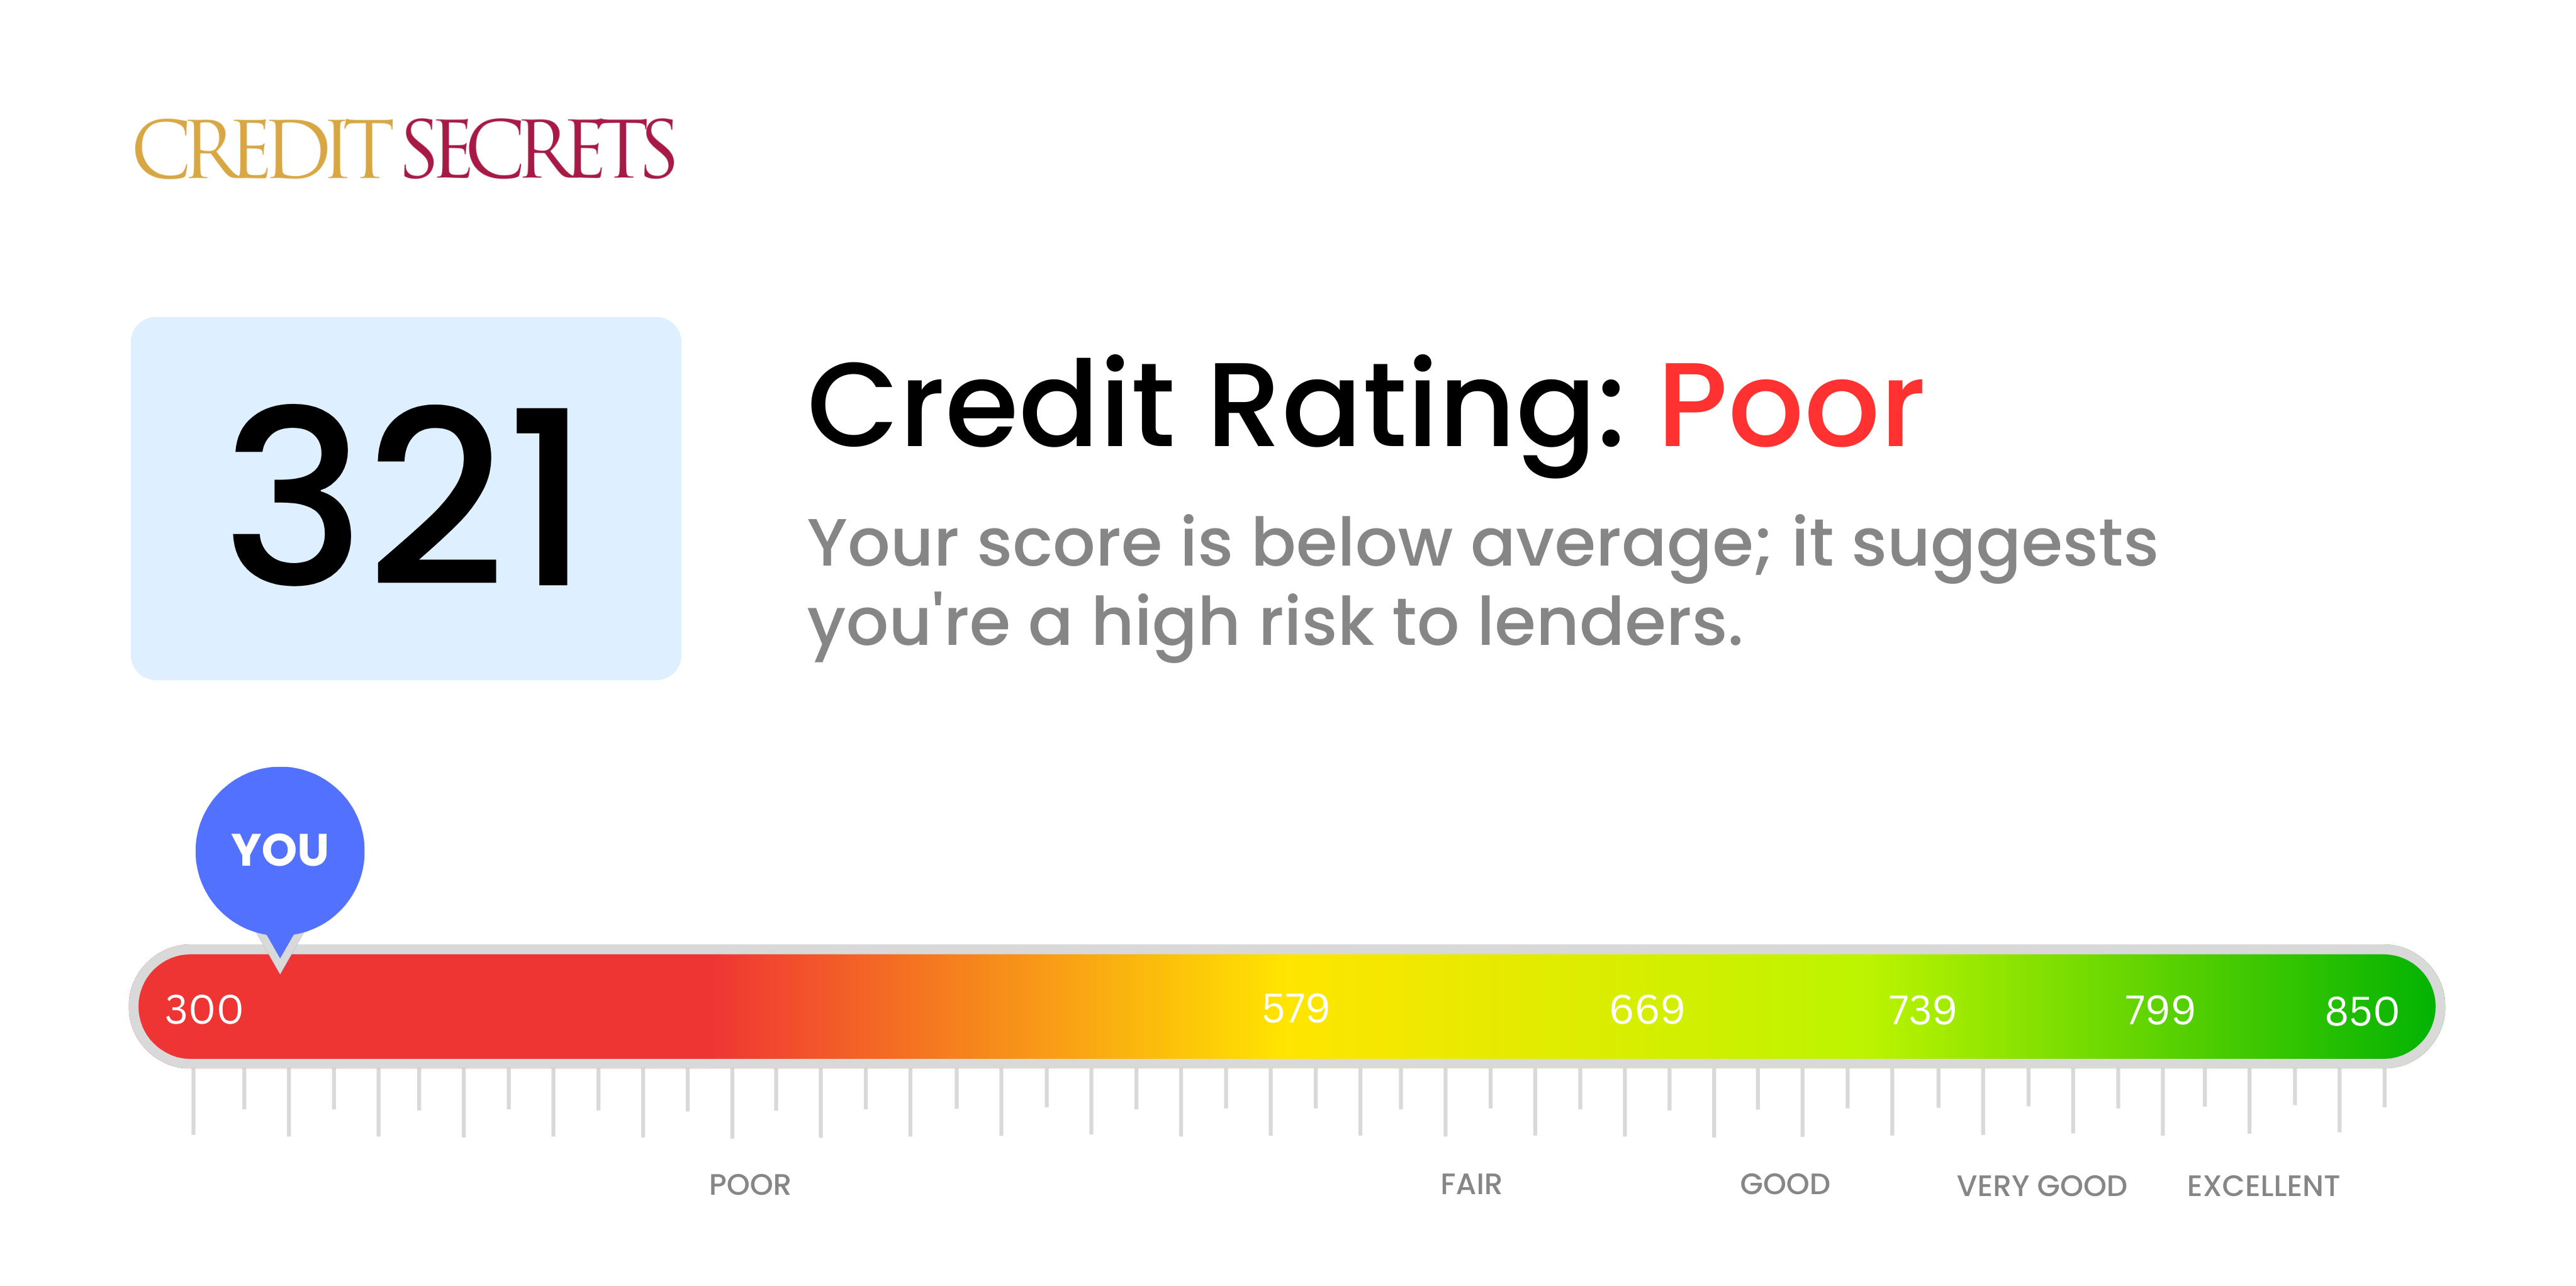 Is 321 a good credit score?